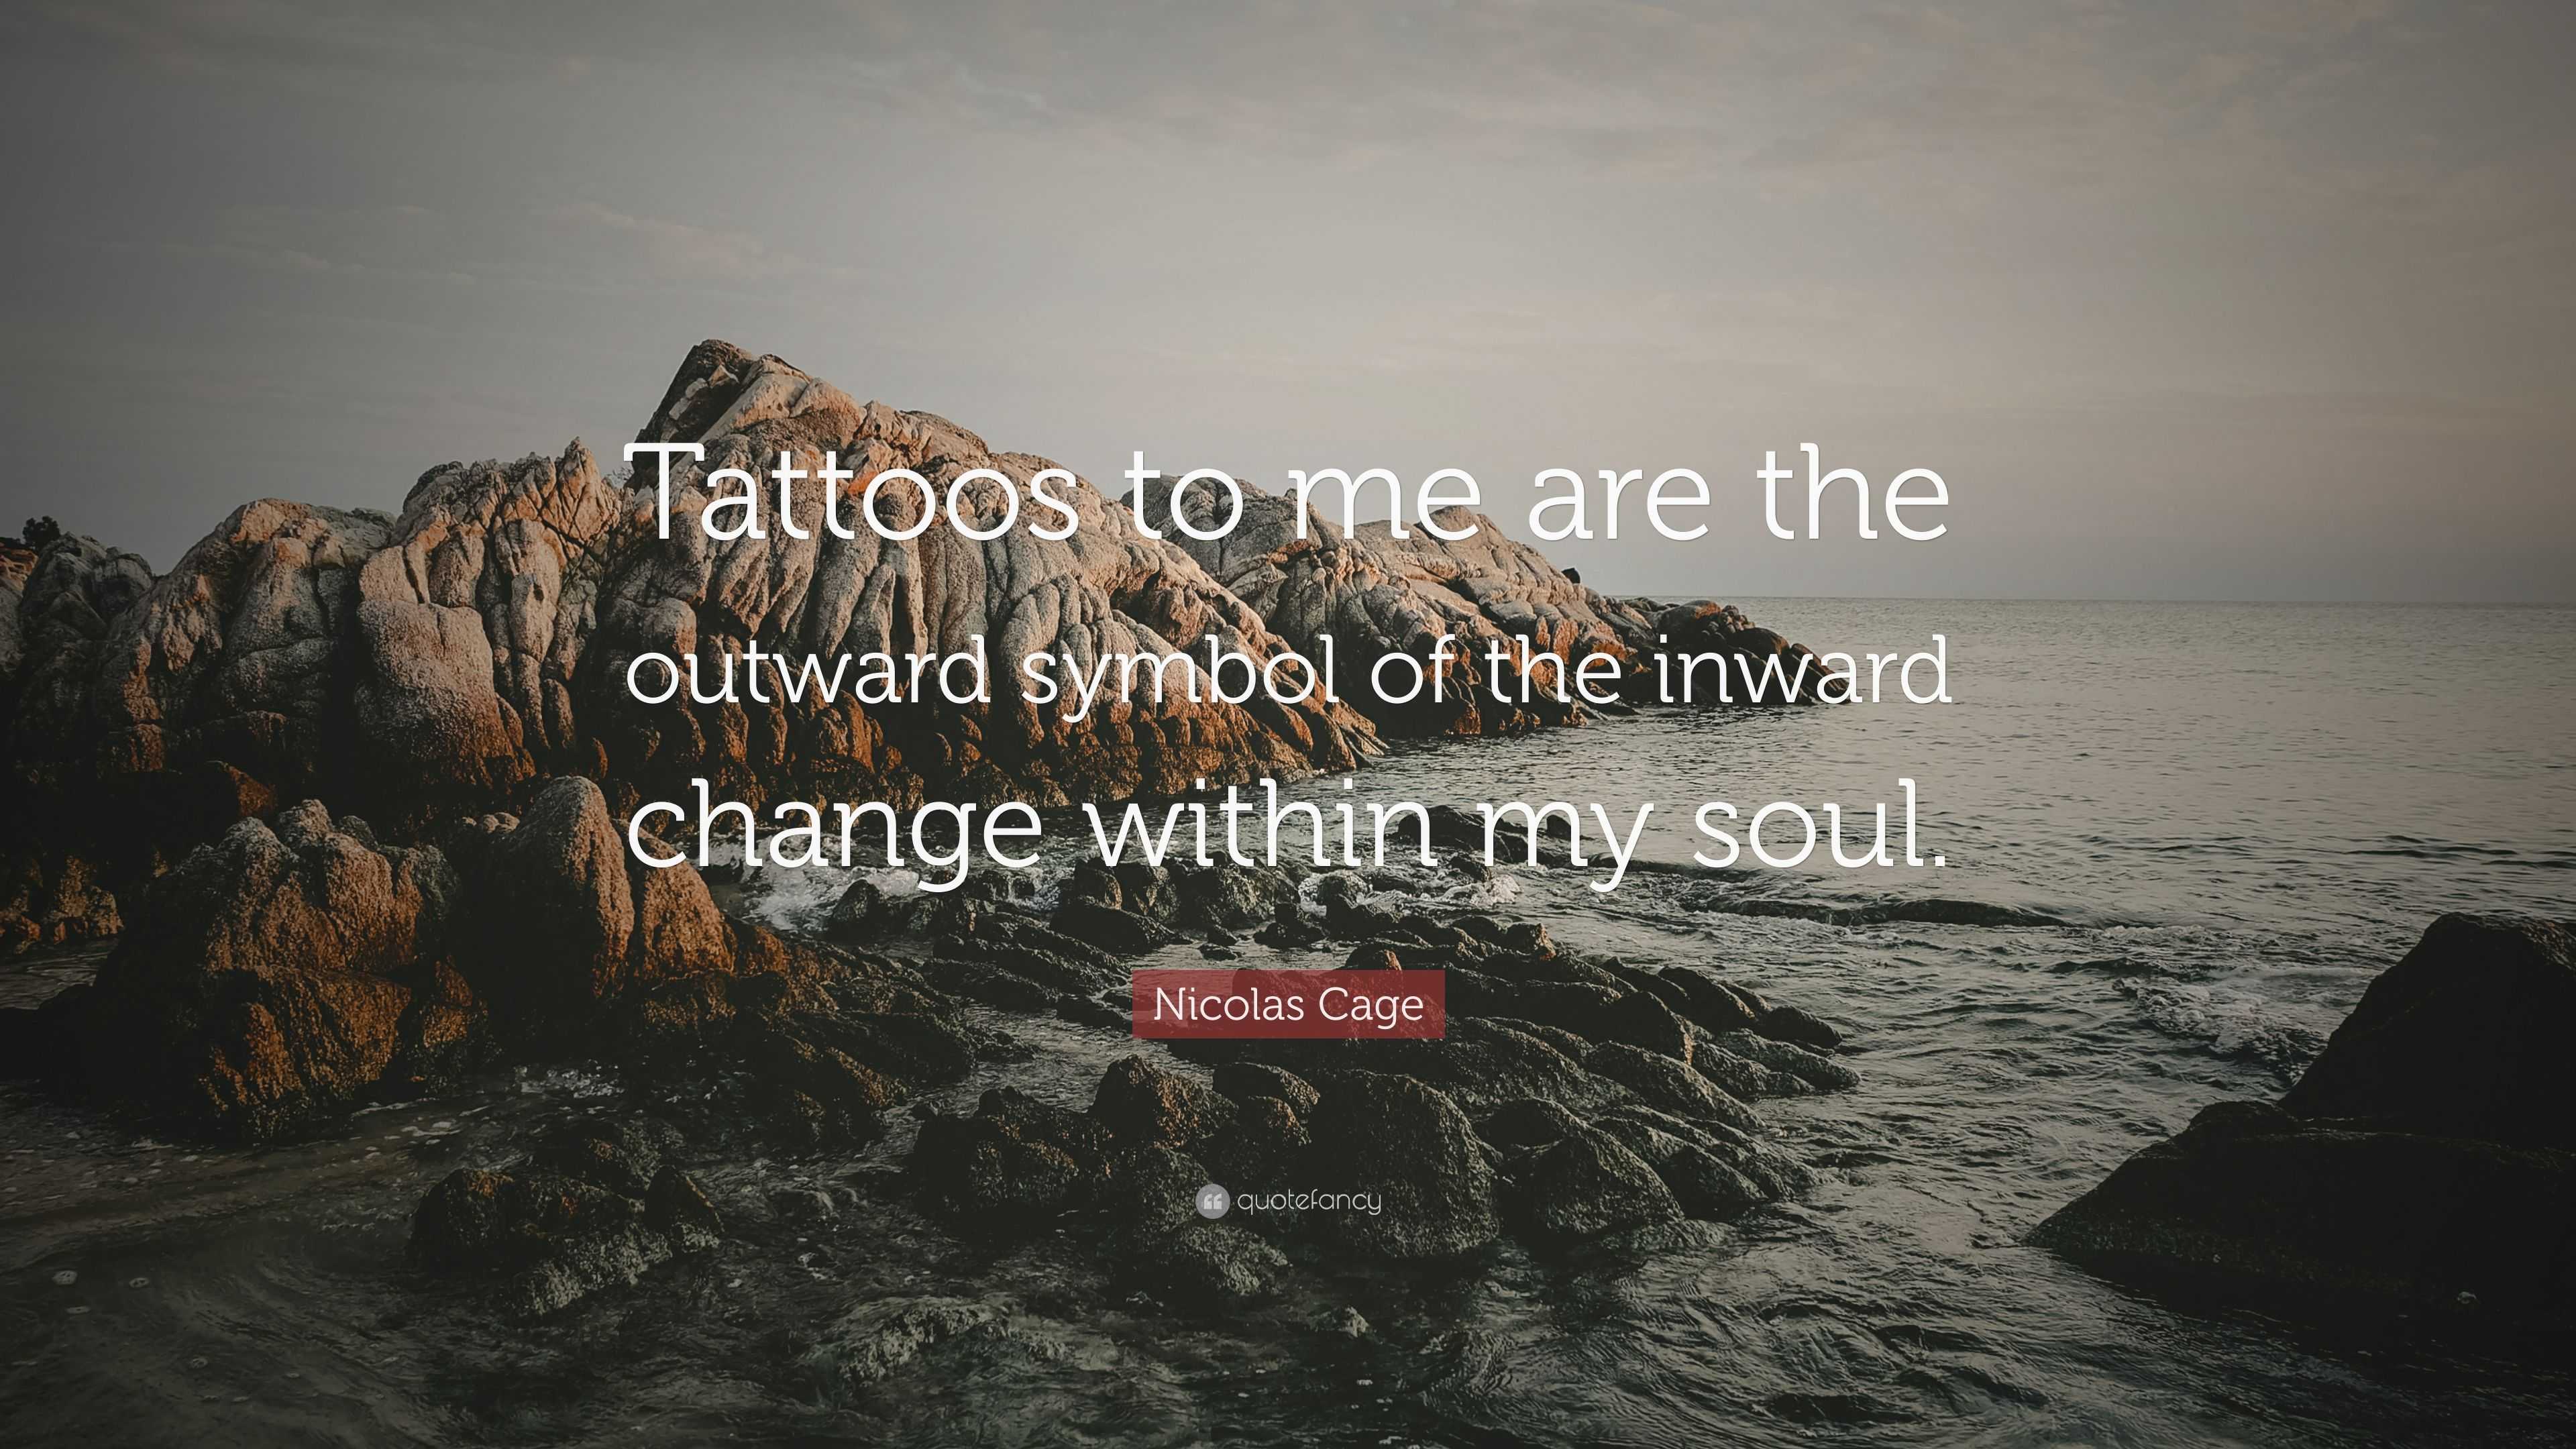 Top God Quote Tattoos to Express Your Faith - The Top Quote